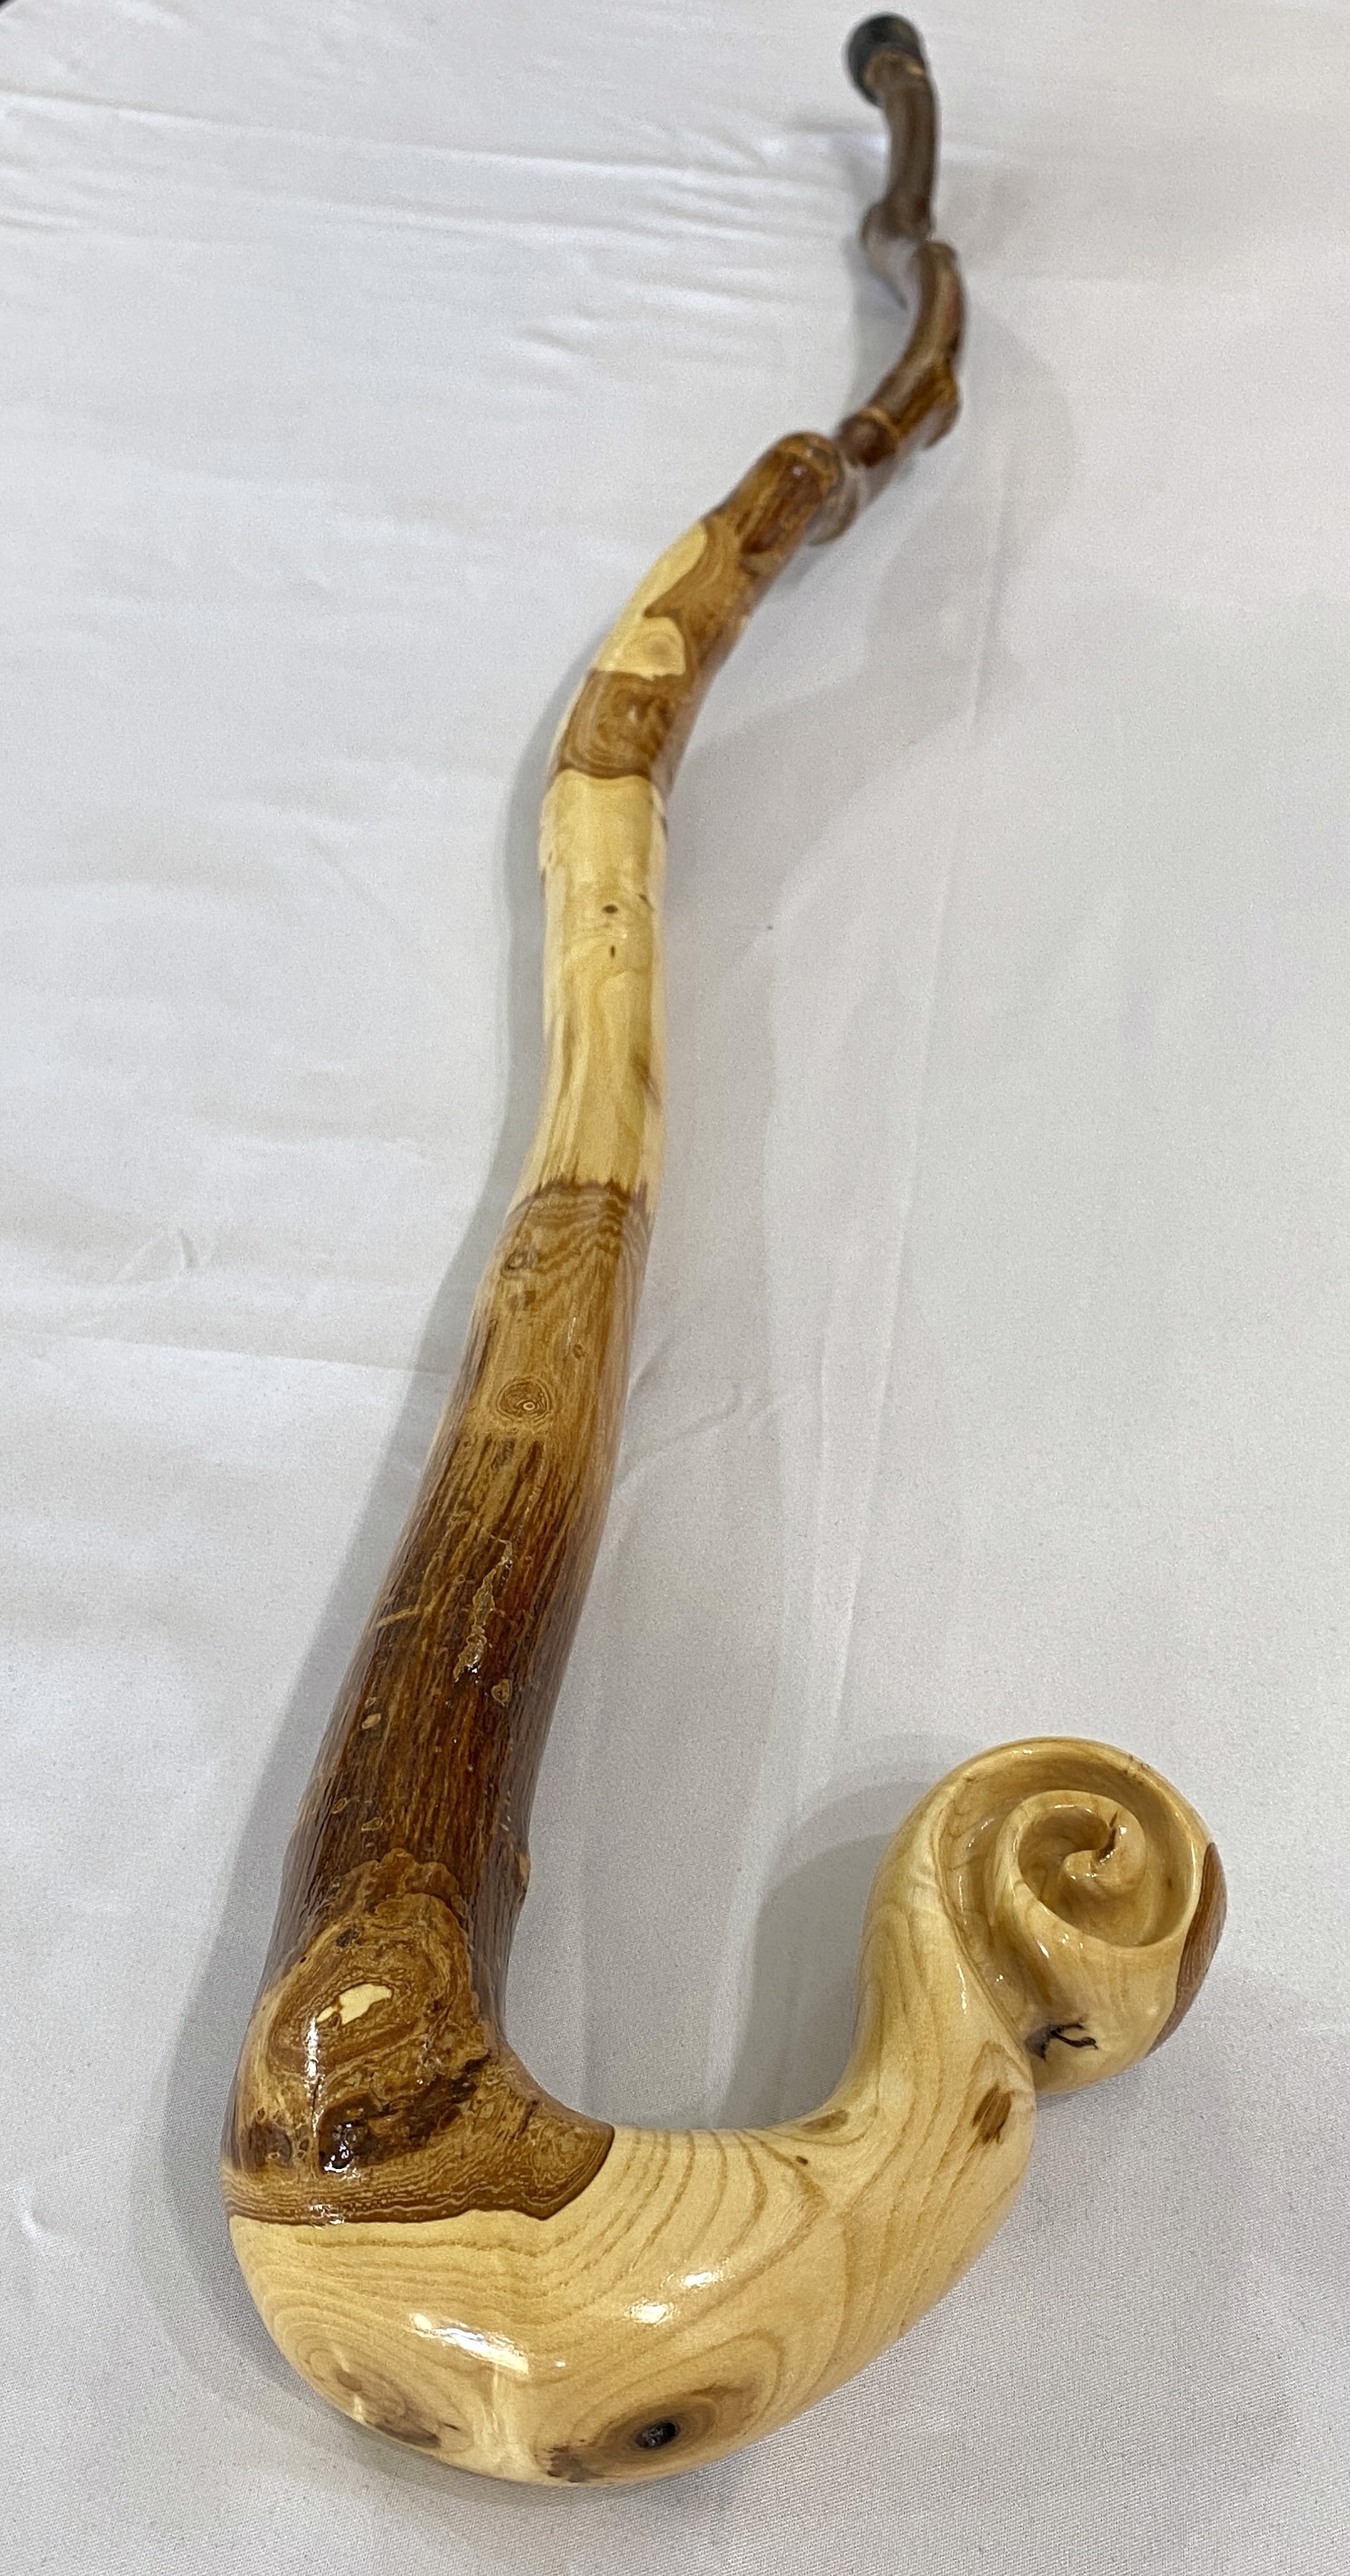 Wooden Walking Stick #8 by Kevin Foote